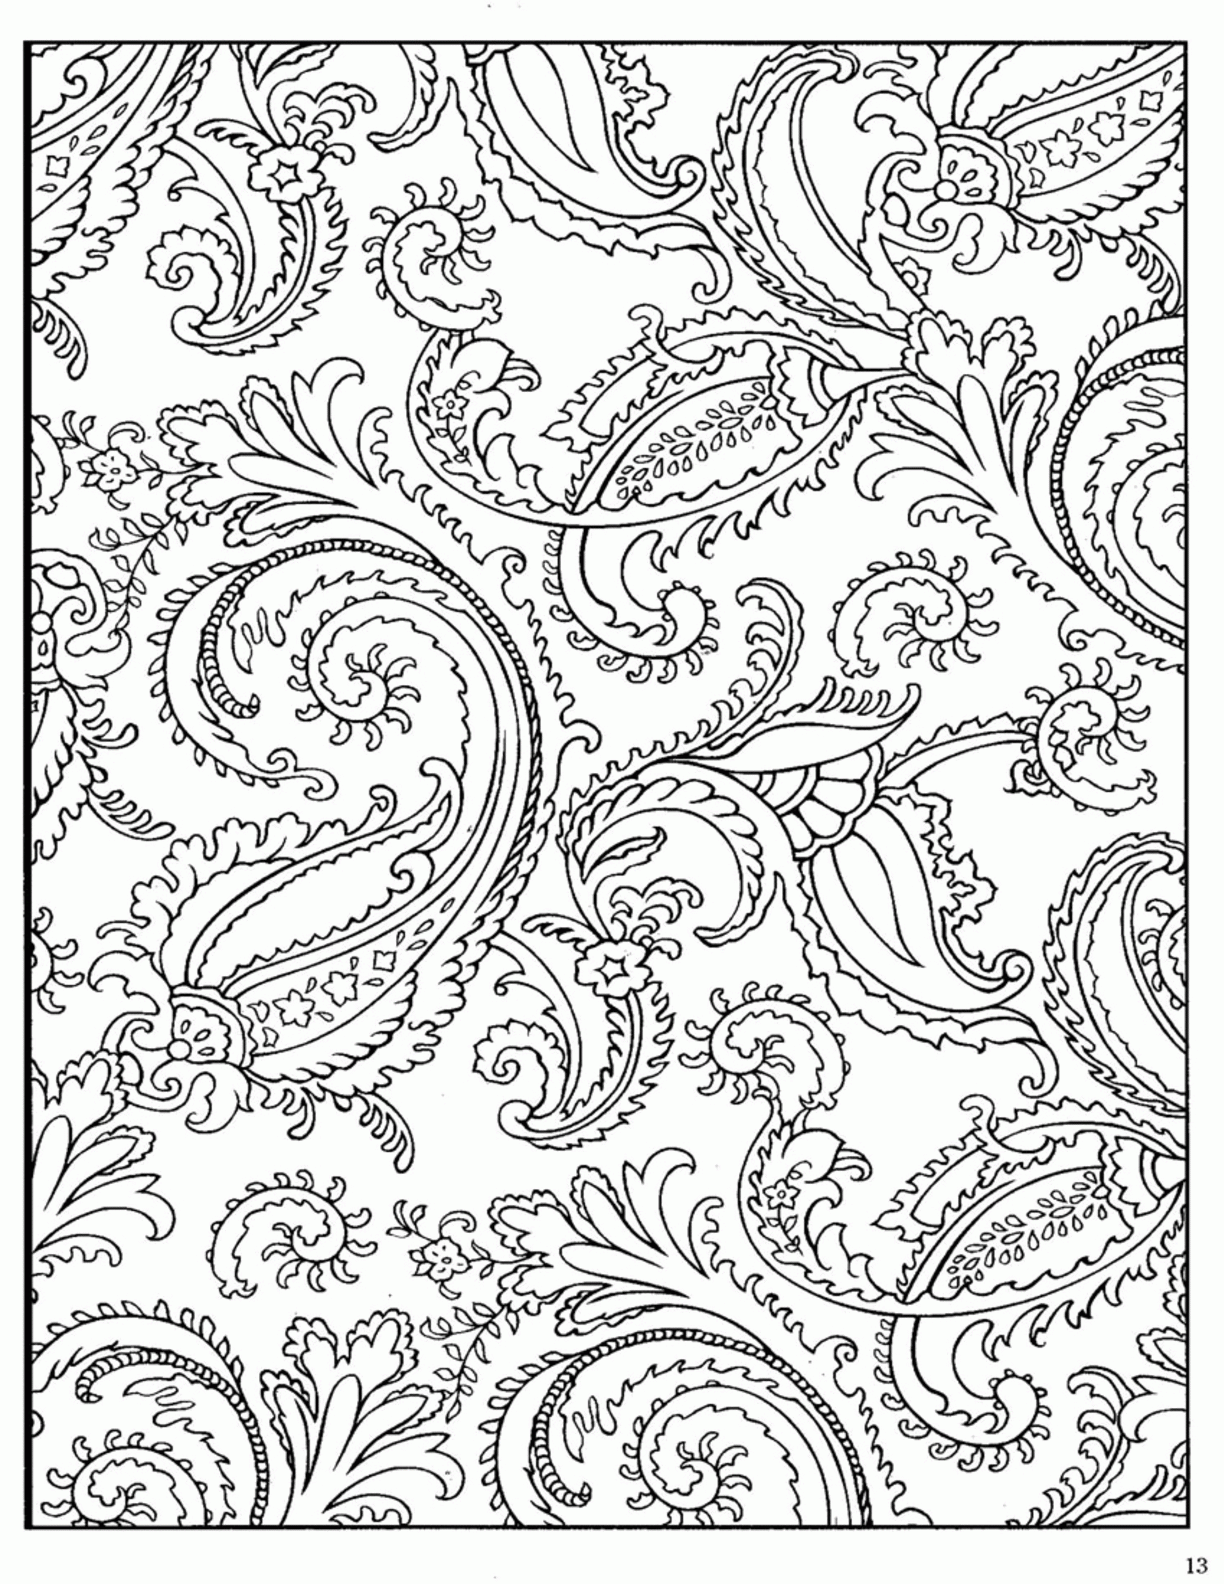 11 Pics of Paisley Heart Coloring Pages - Paisley Embroidery ...